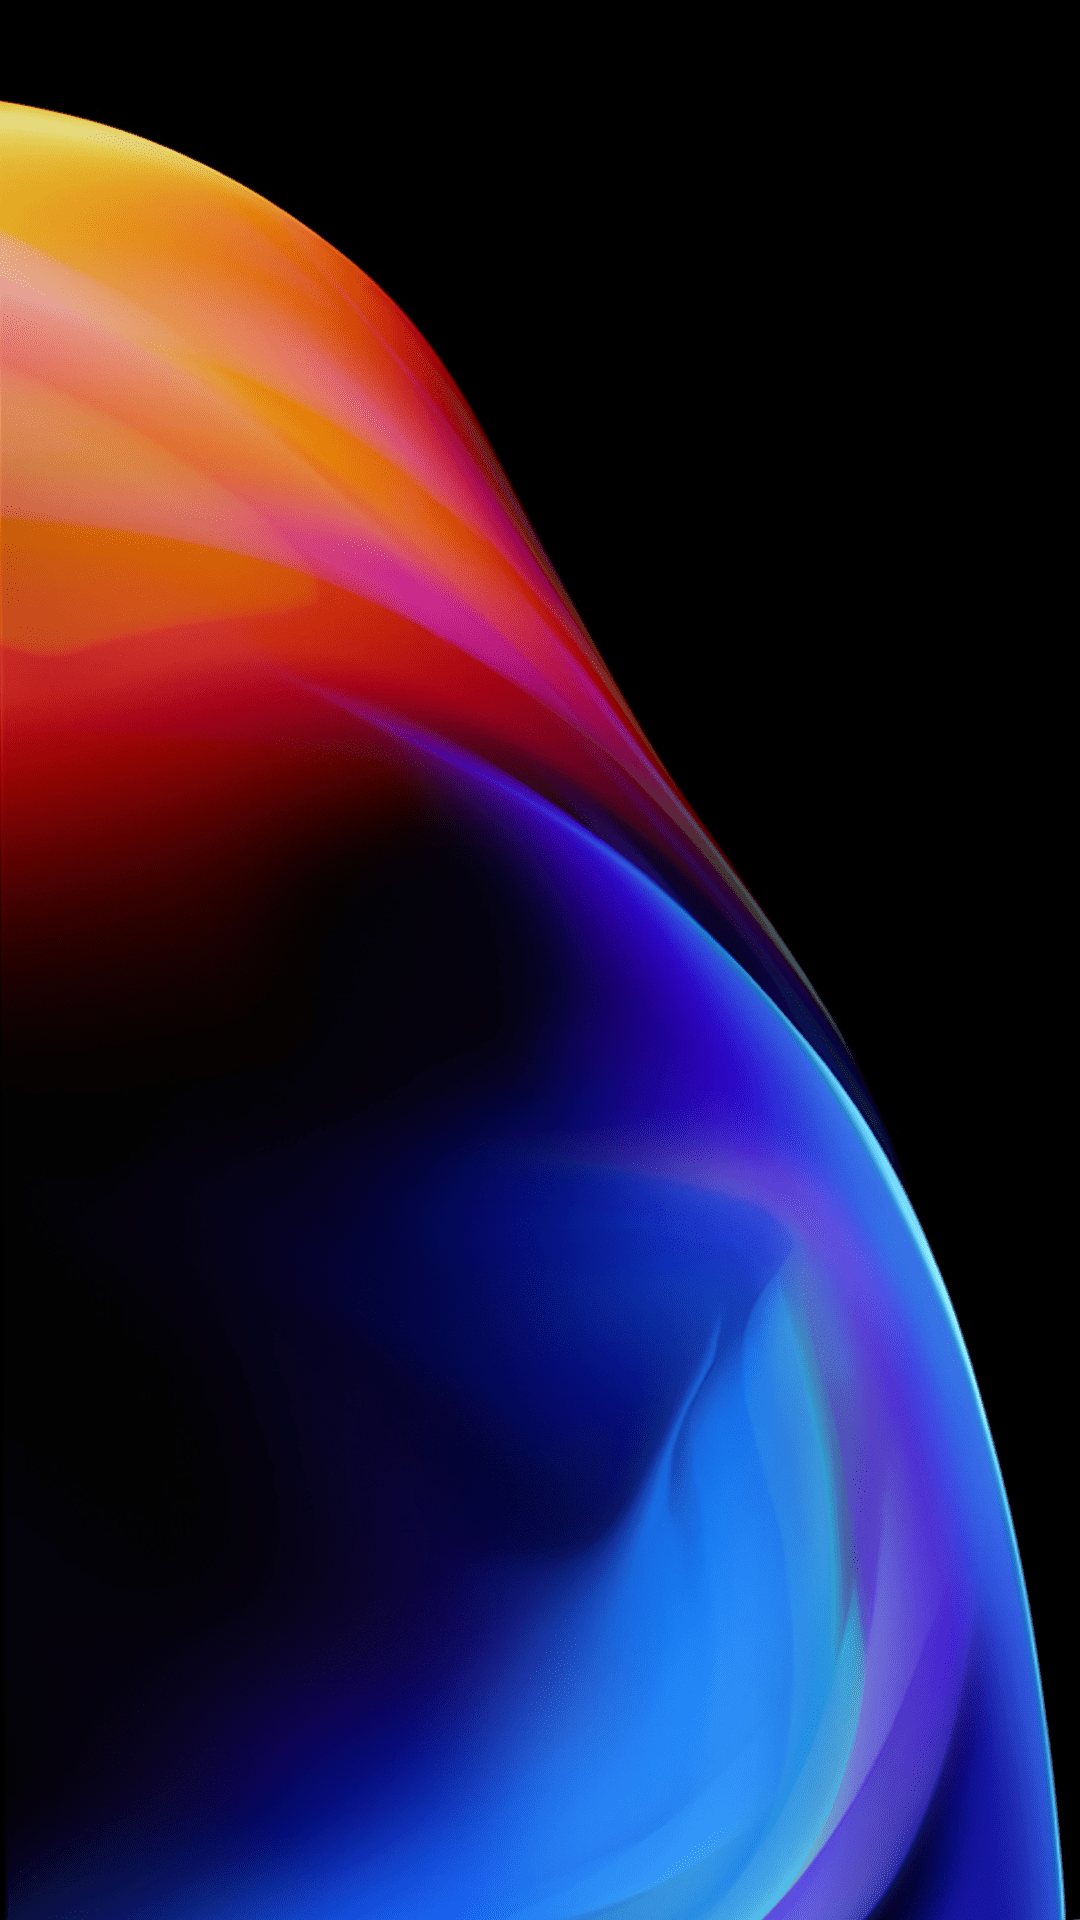 iPadOS 17 Wallpapers and Backgrounds - WallpaperCG